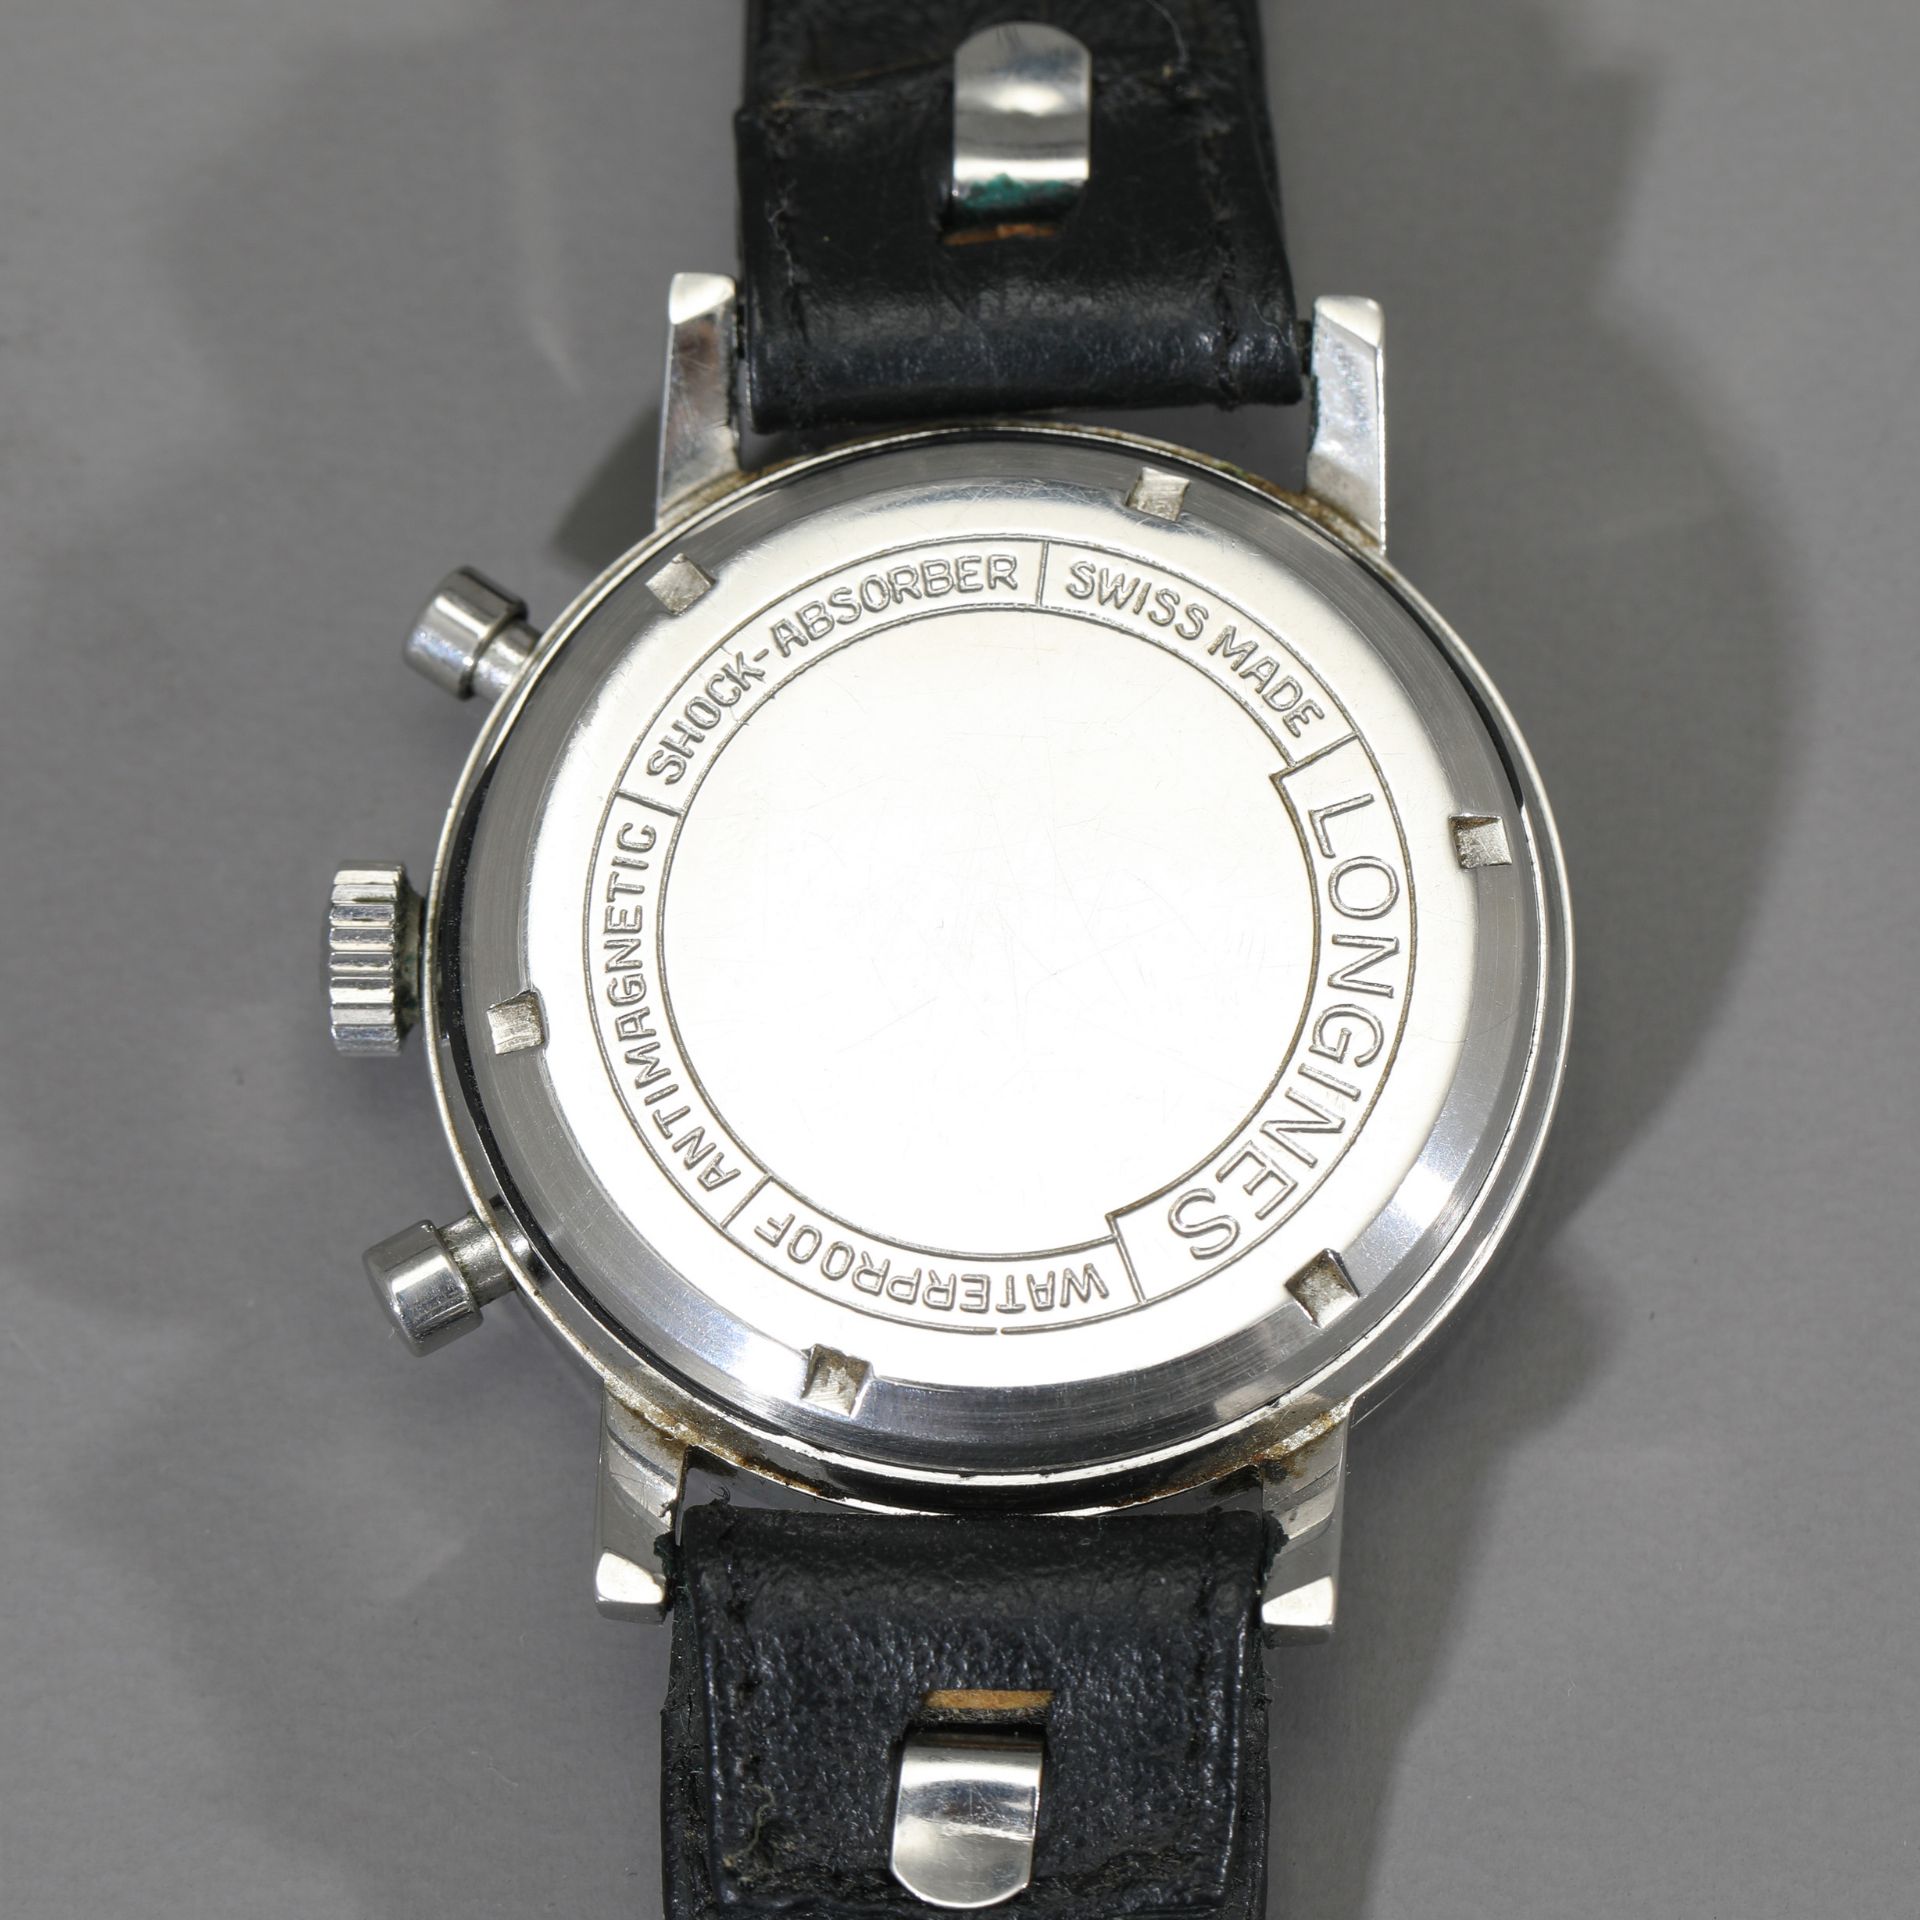 Longines Wristwatch Flyback Ref. 7413 - Image 4 of 6